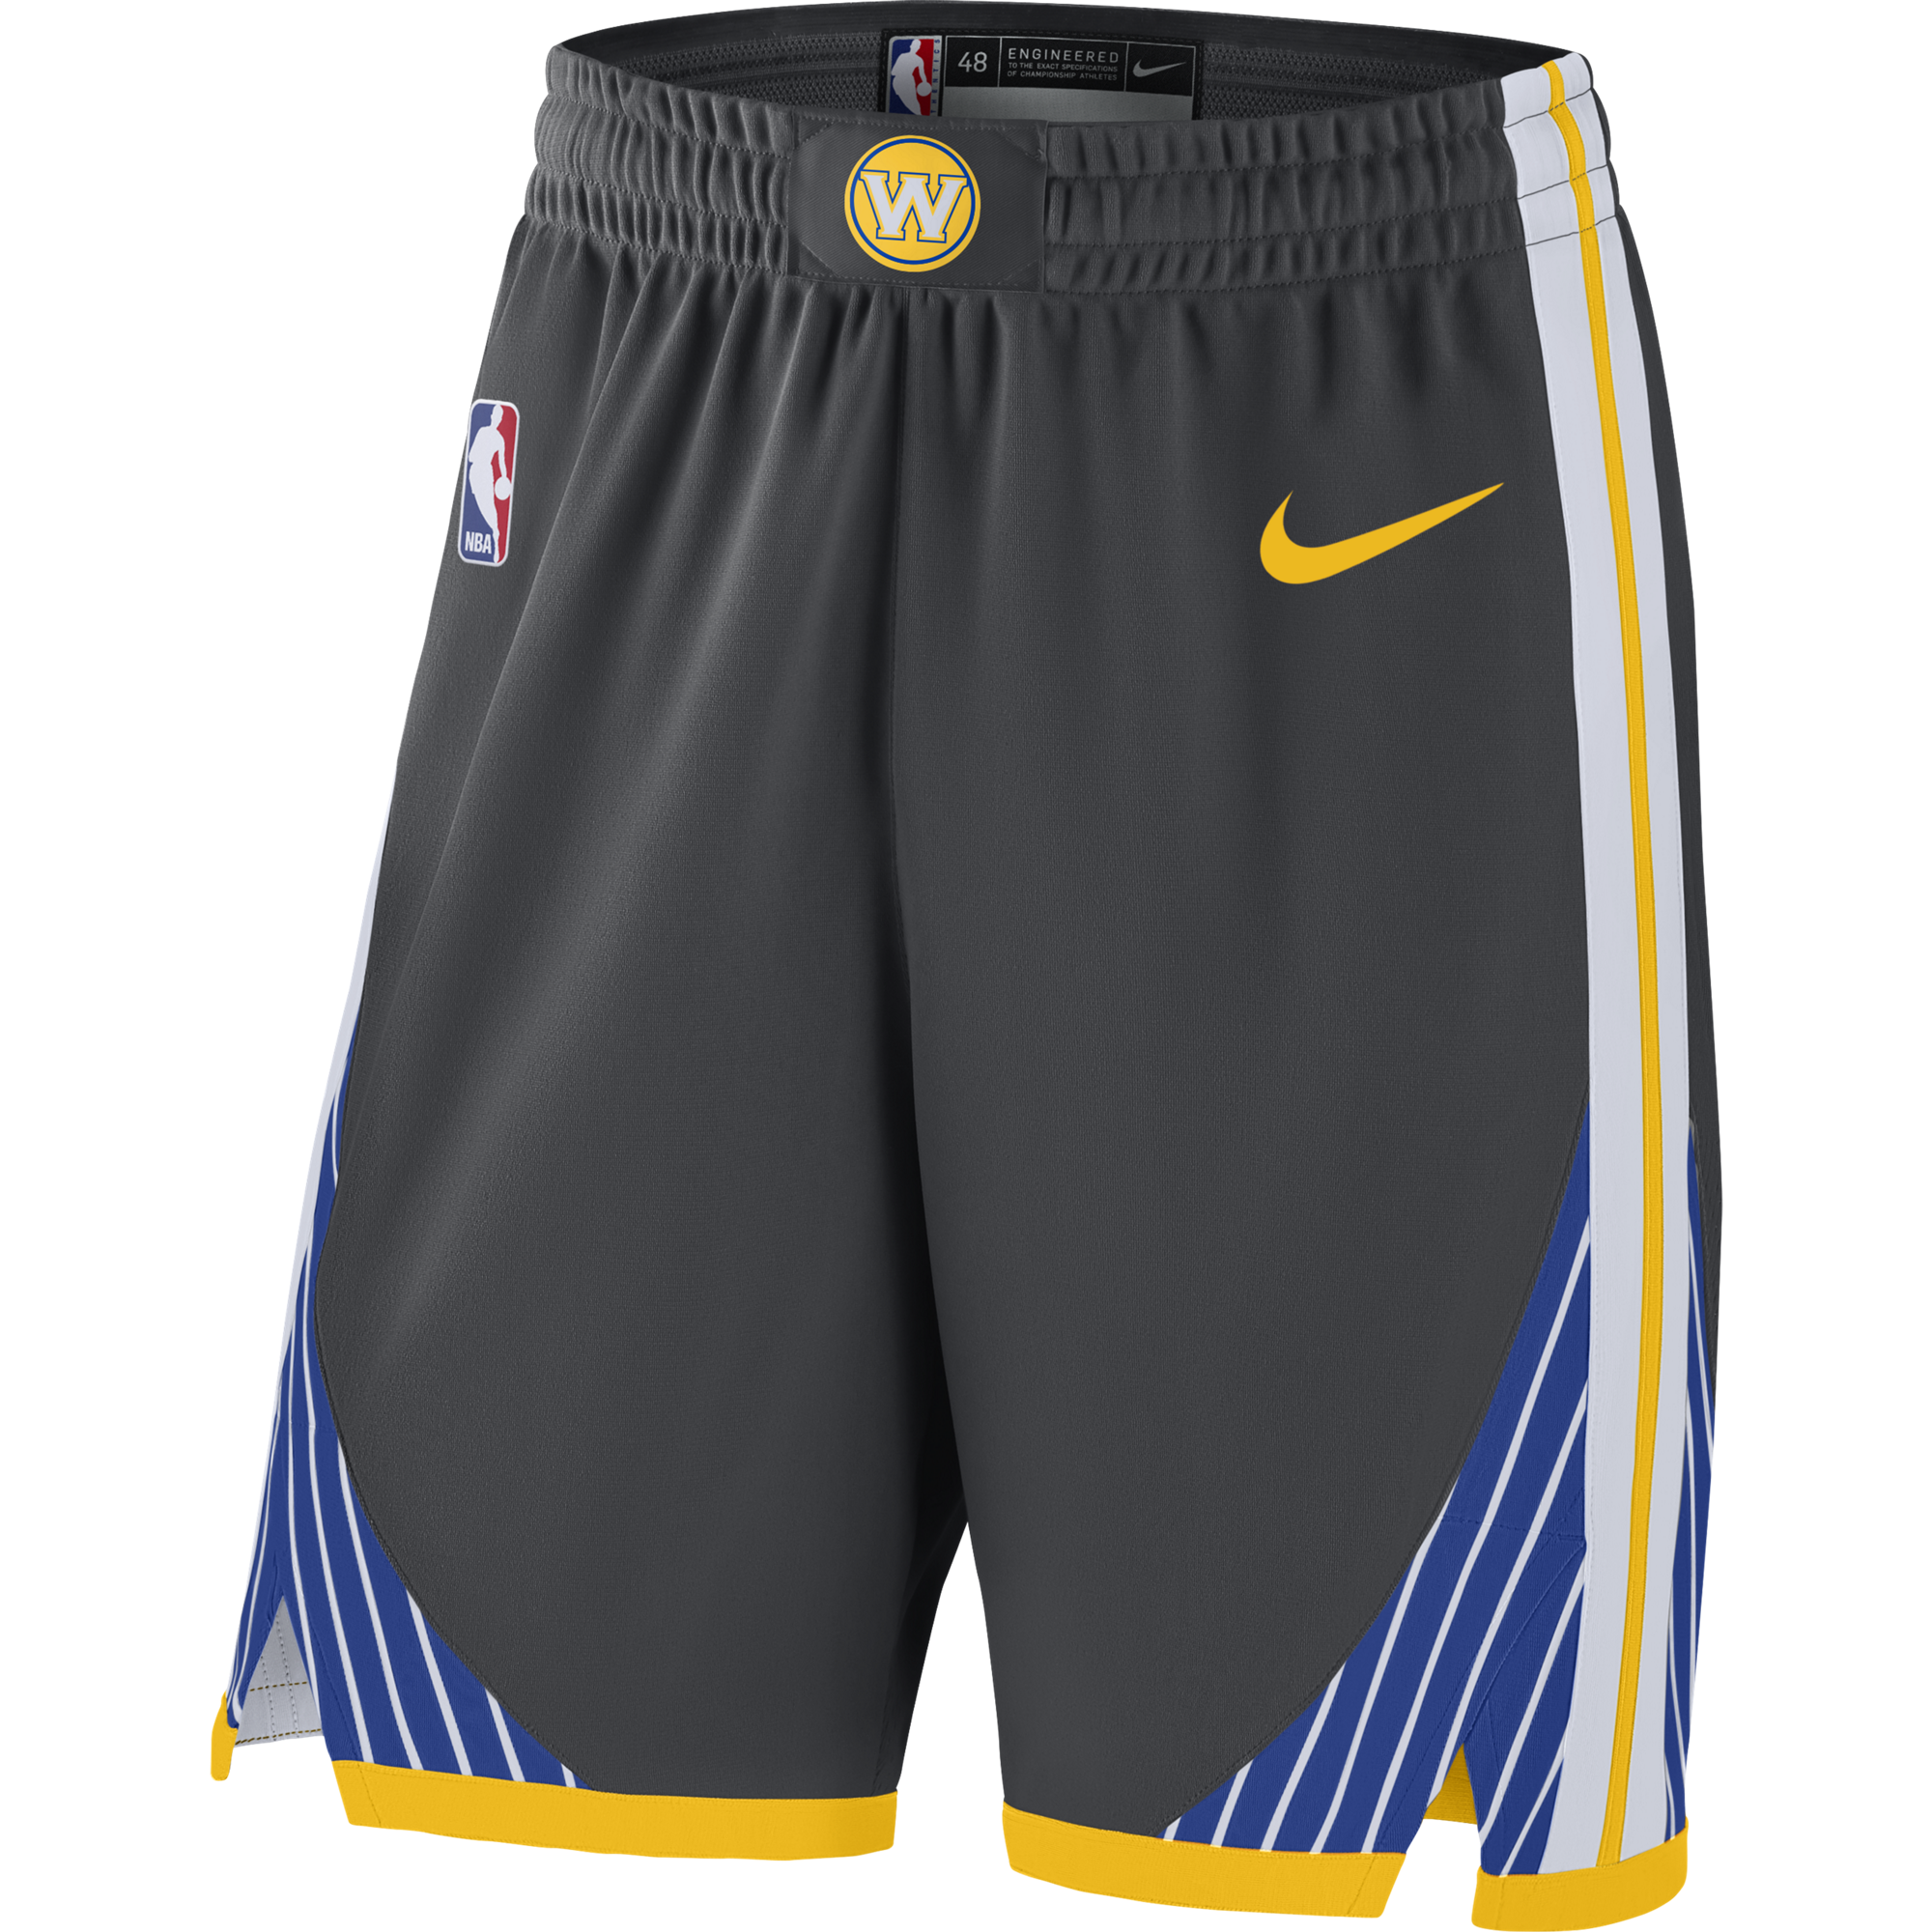 NIKE NBA GOLDEN STATE WARRIORS GSW AUTHENTIC SHORTS ANTHRACITE